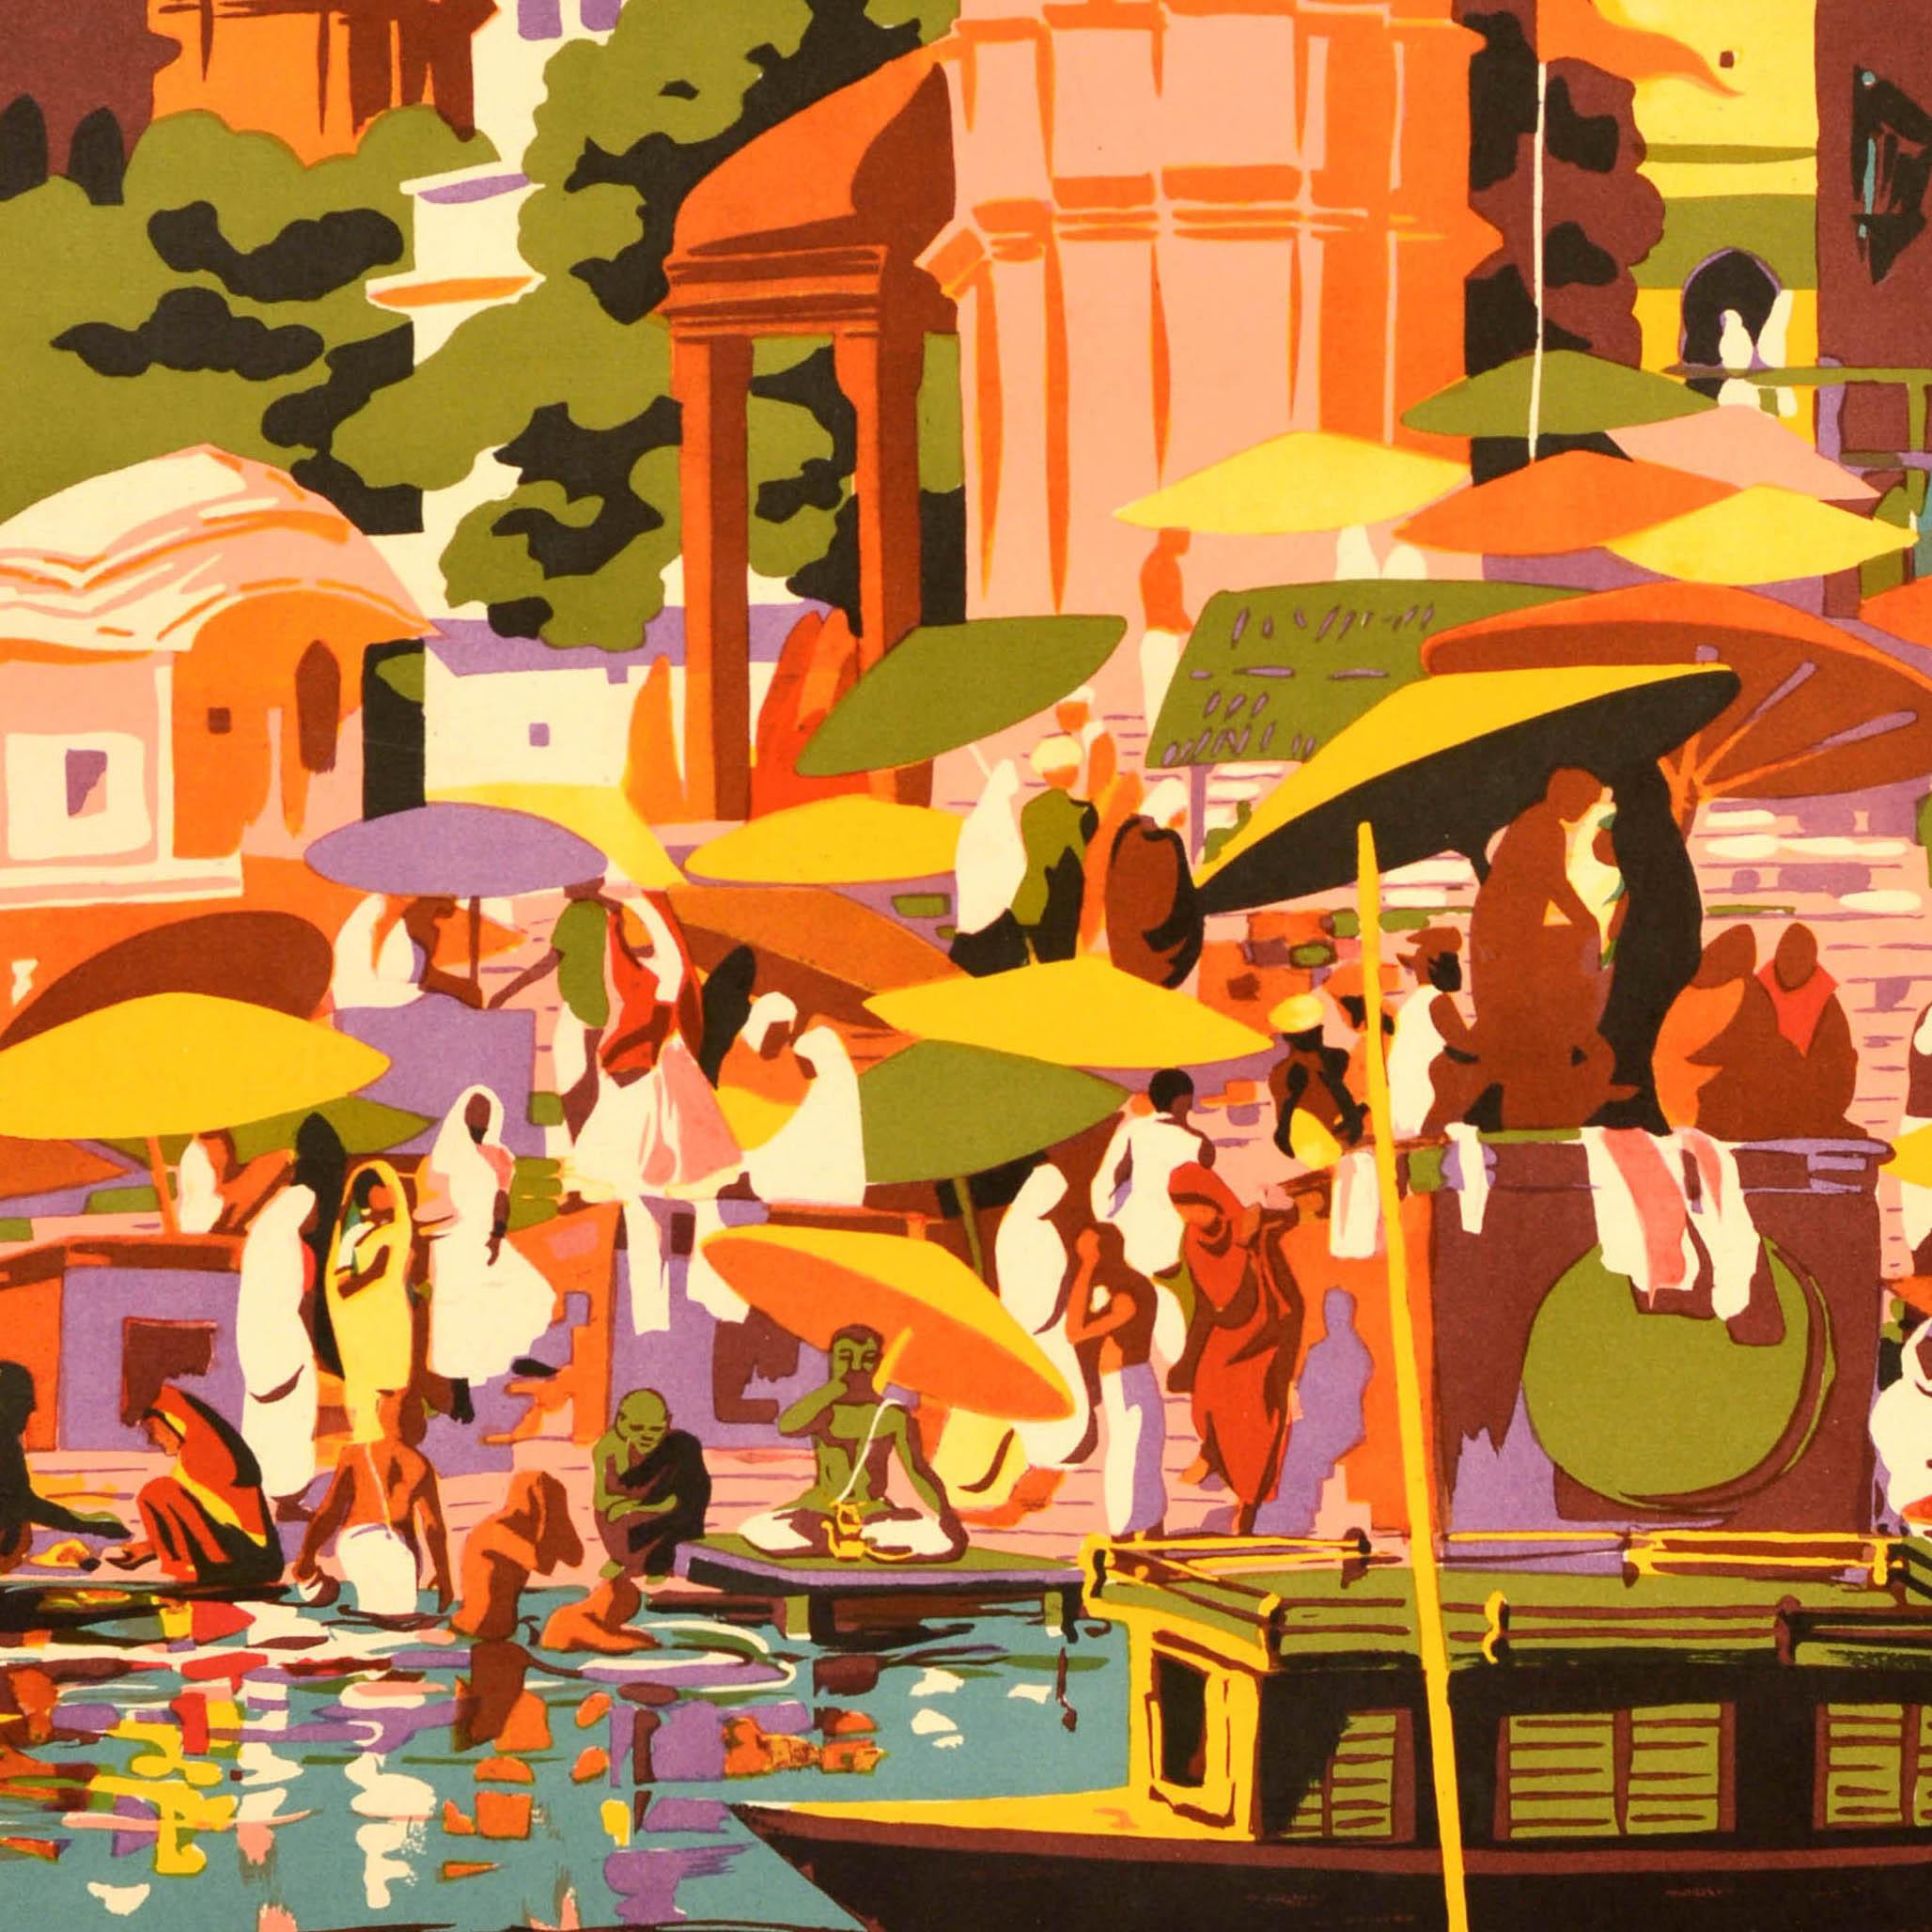 Original vintage travel poster for Varanasi / Banaras in India featuring a colourful mid-century design showing people in traditional clothing and sari dresses under umbrellas against the sun on the ghats / riverside steps of the Ganges with trees